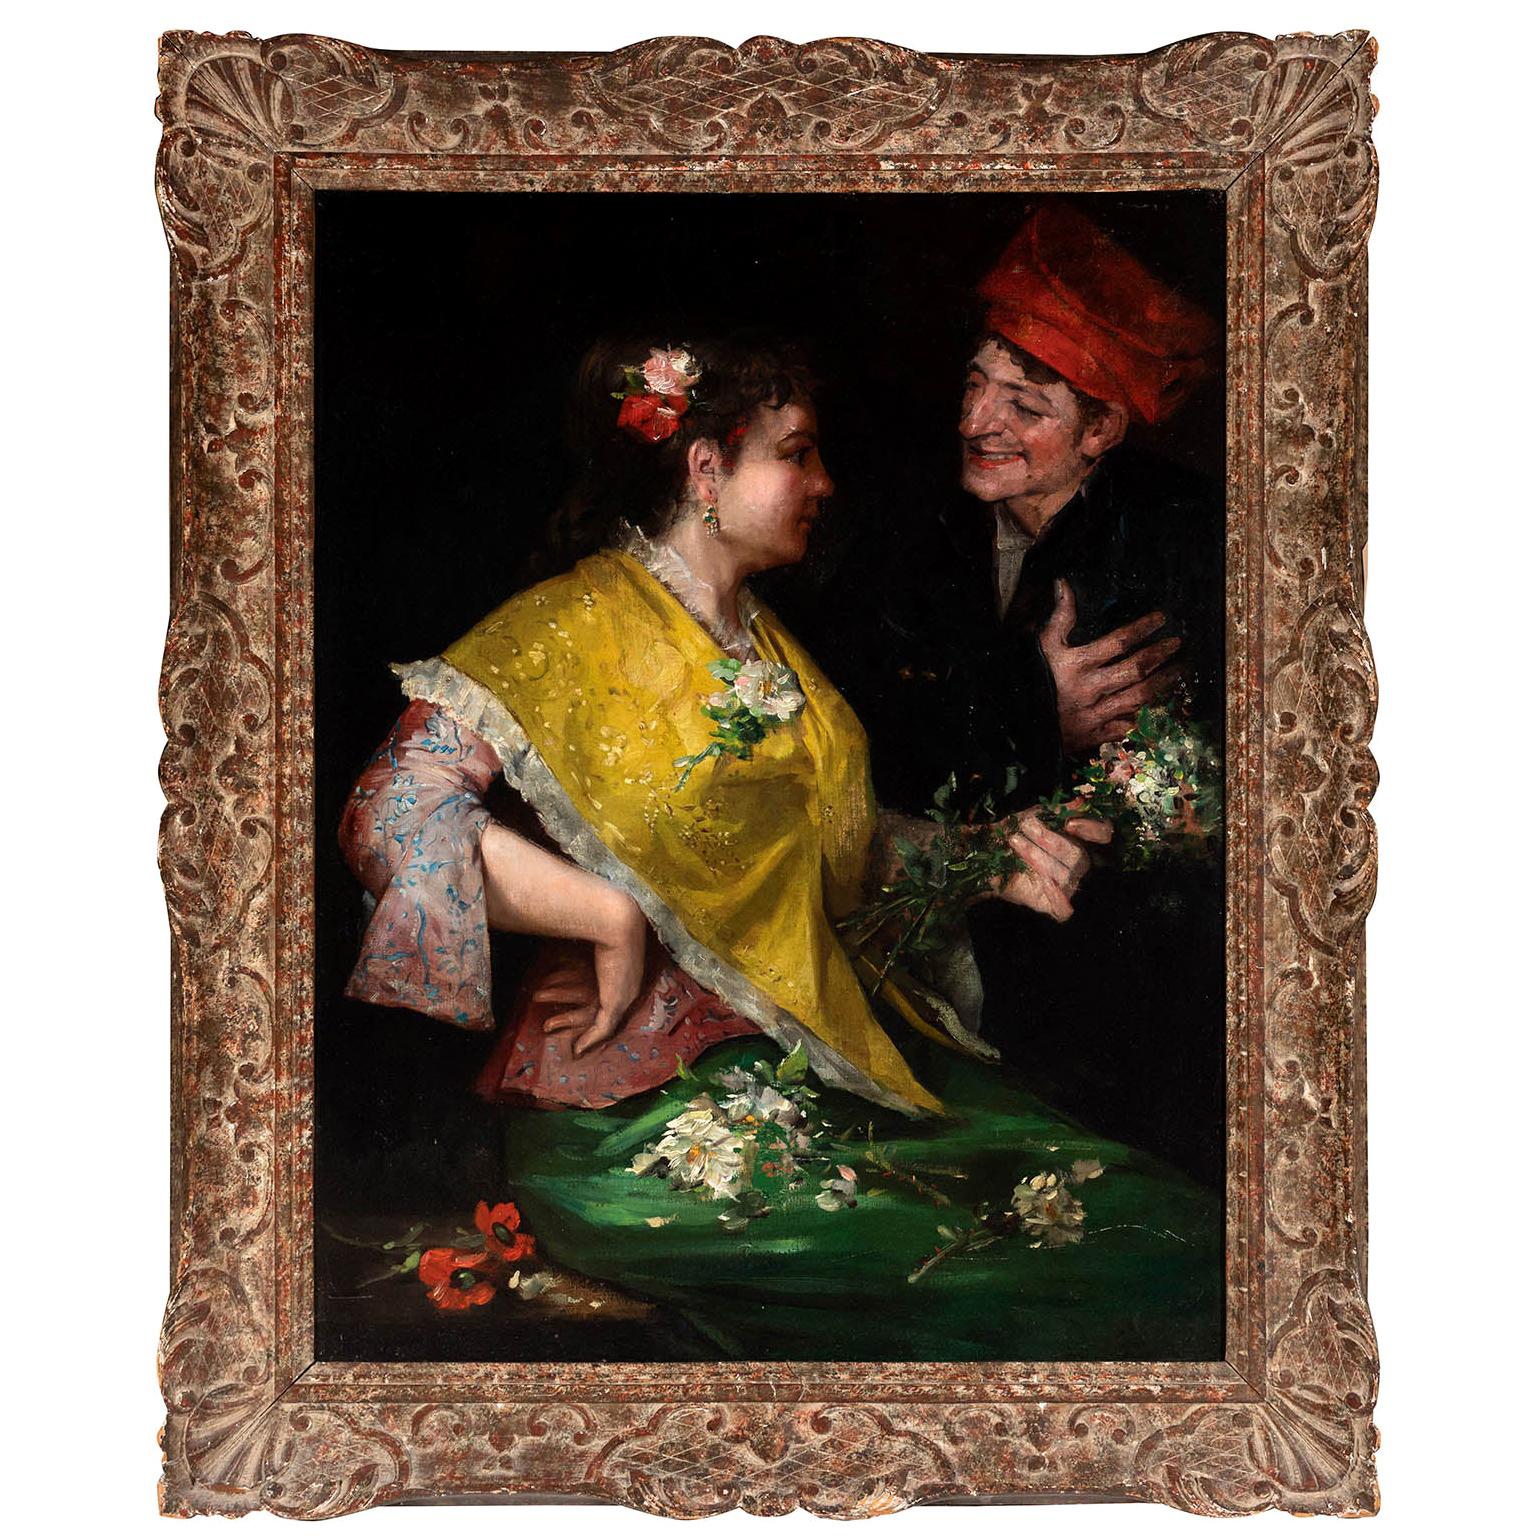 Benito Belli Untitled Late 19th Century Oil on Canvas Painting of Spanish Couple